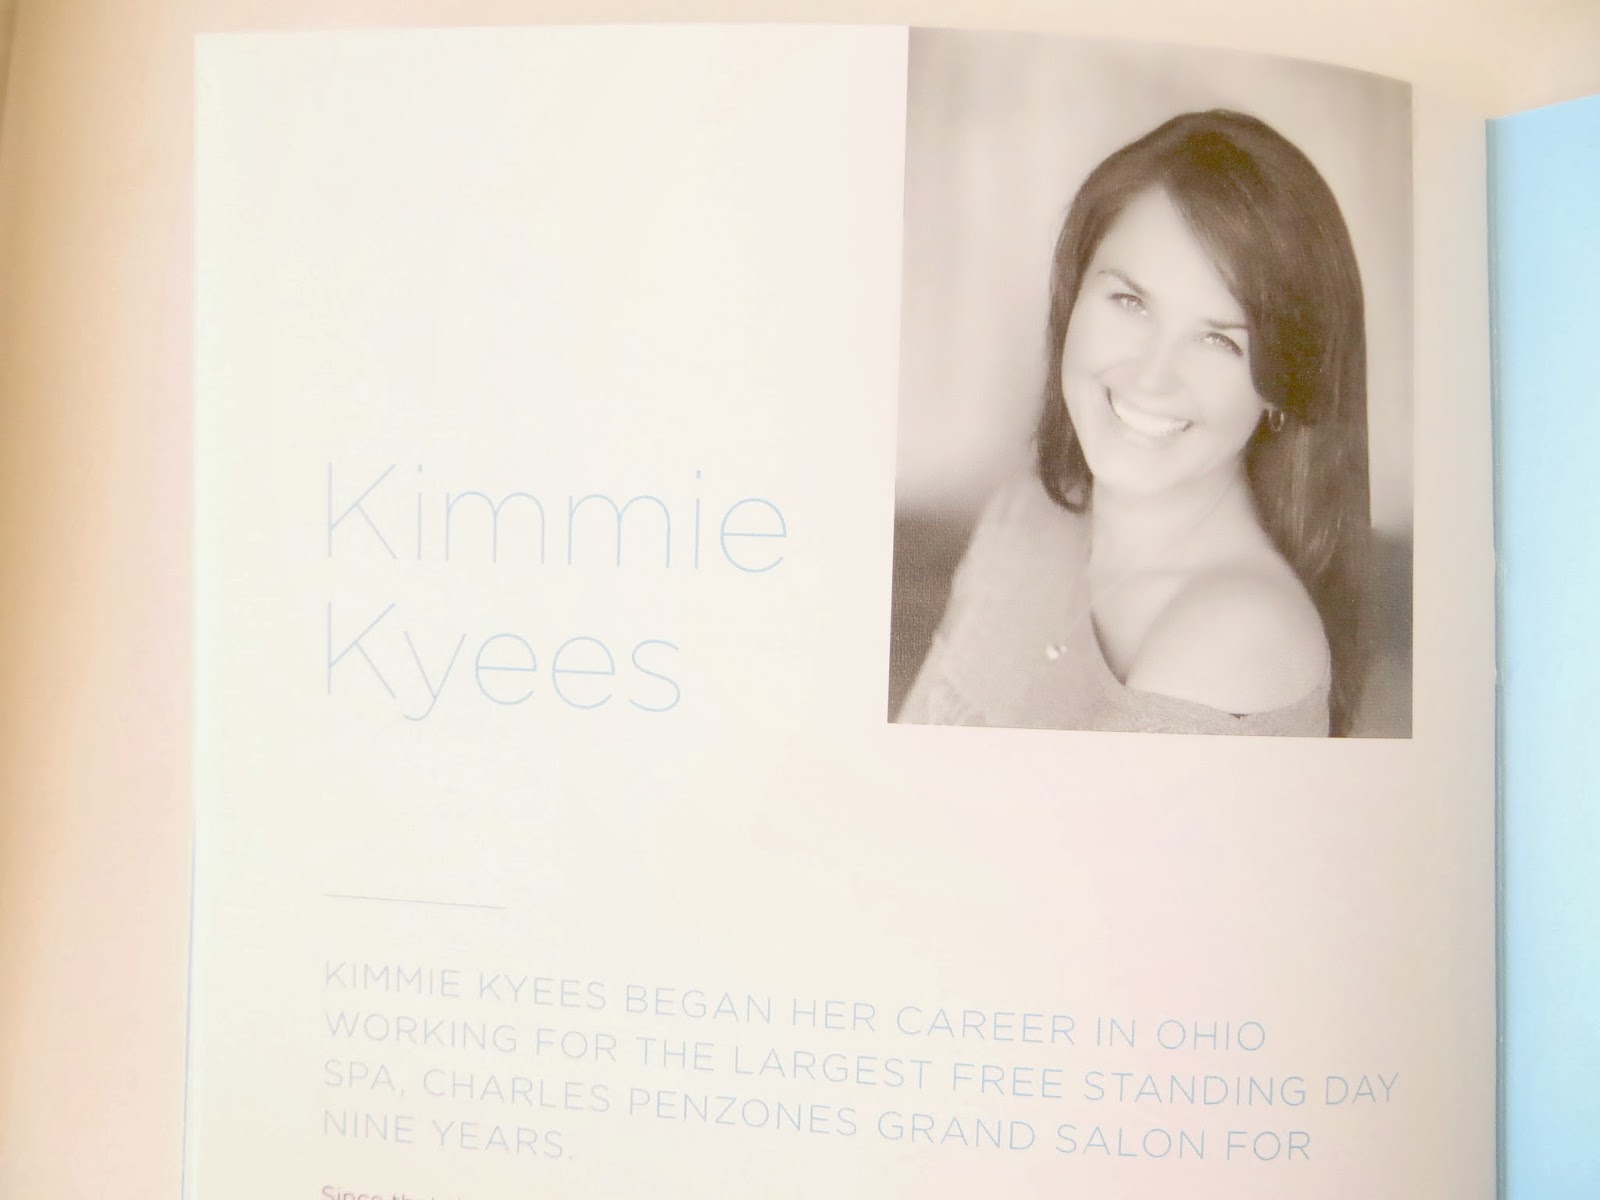 Kimmie Kyees - wide 5